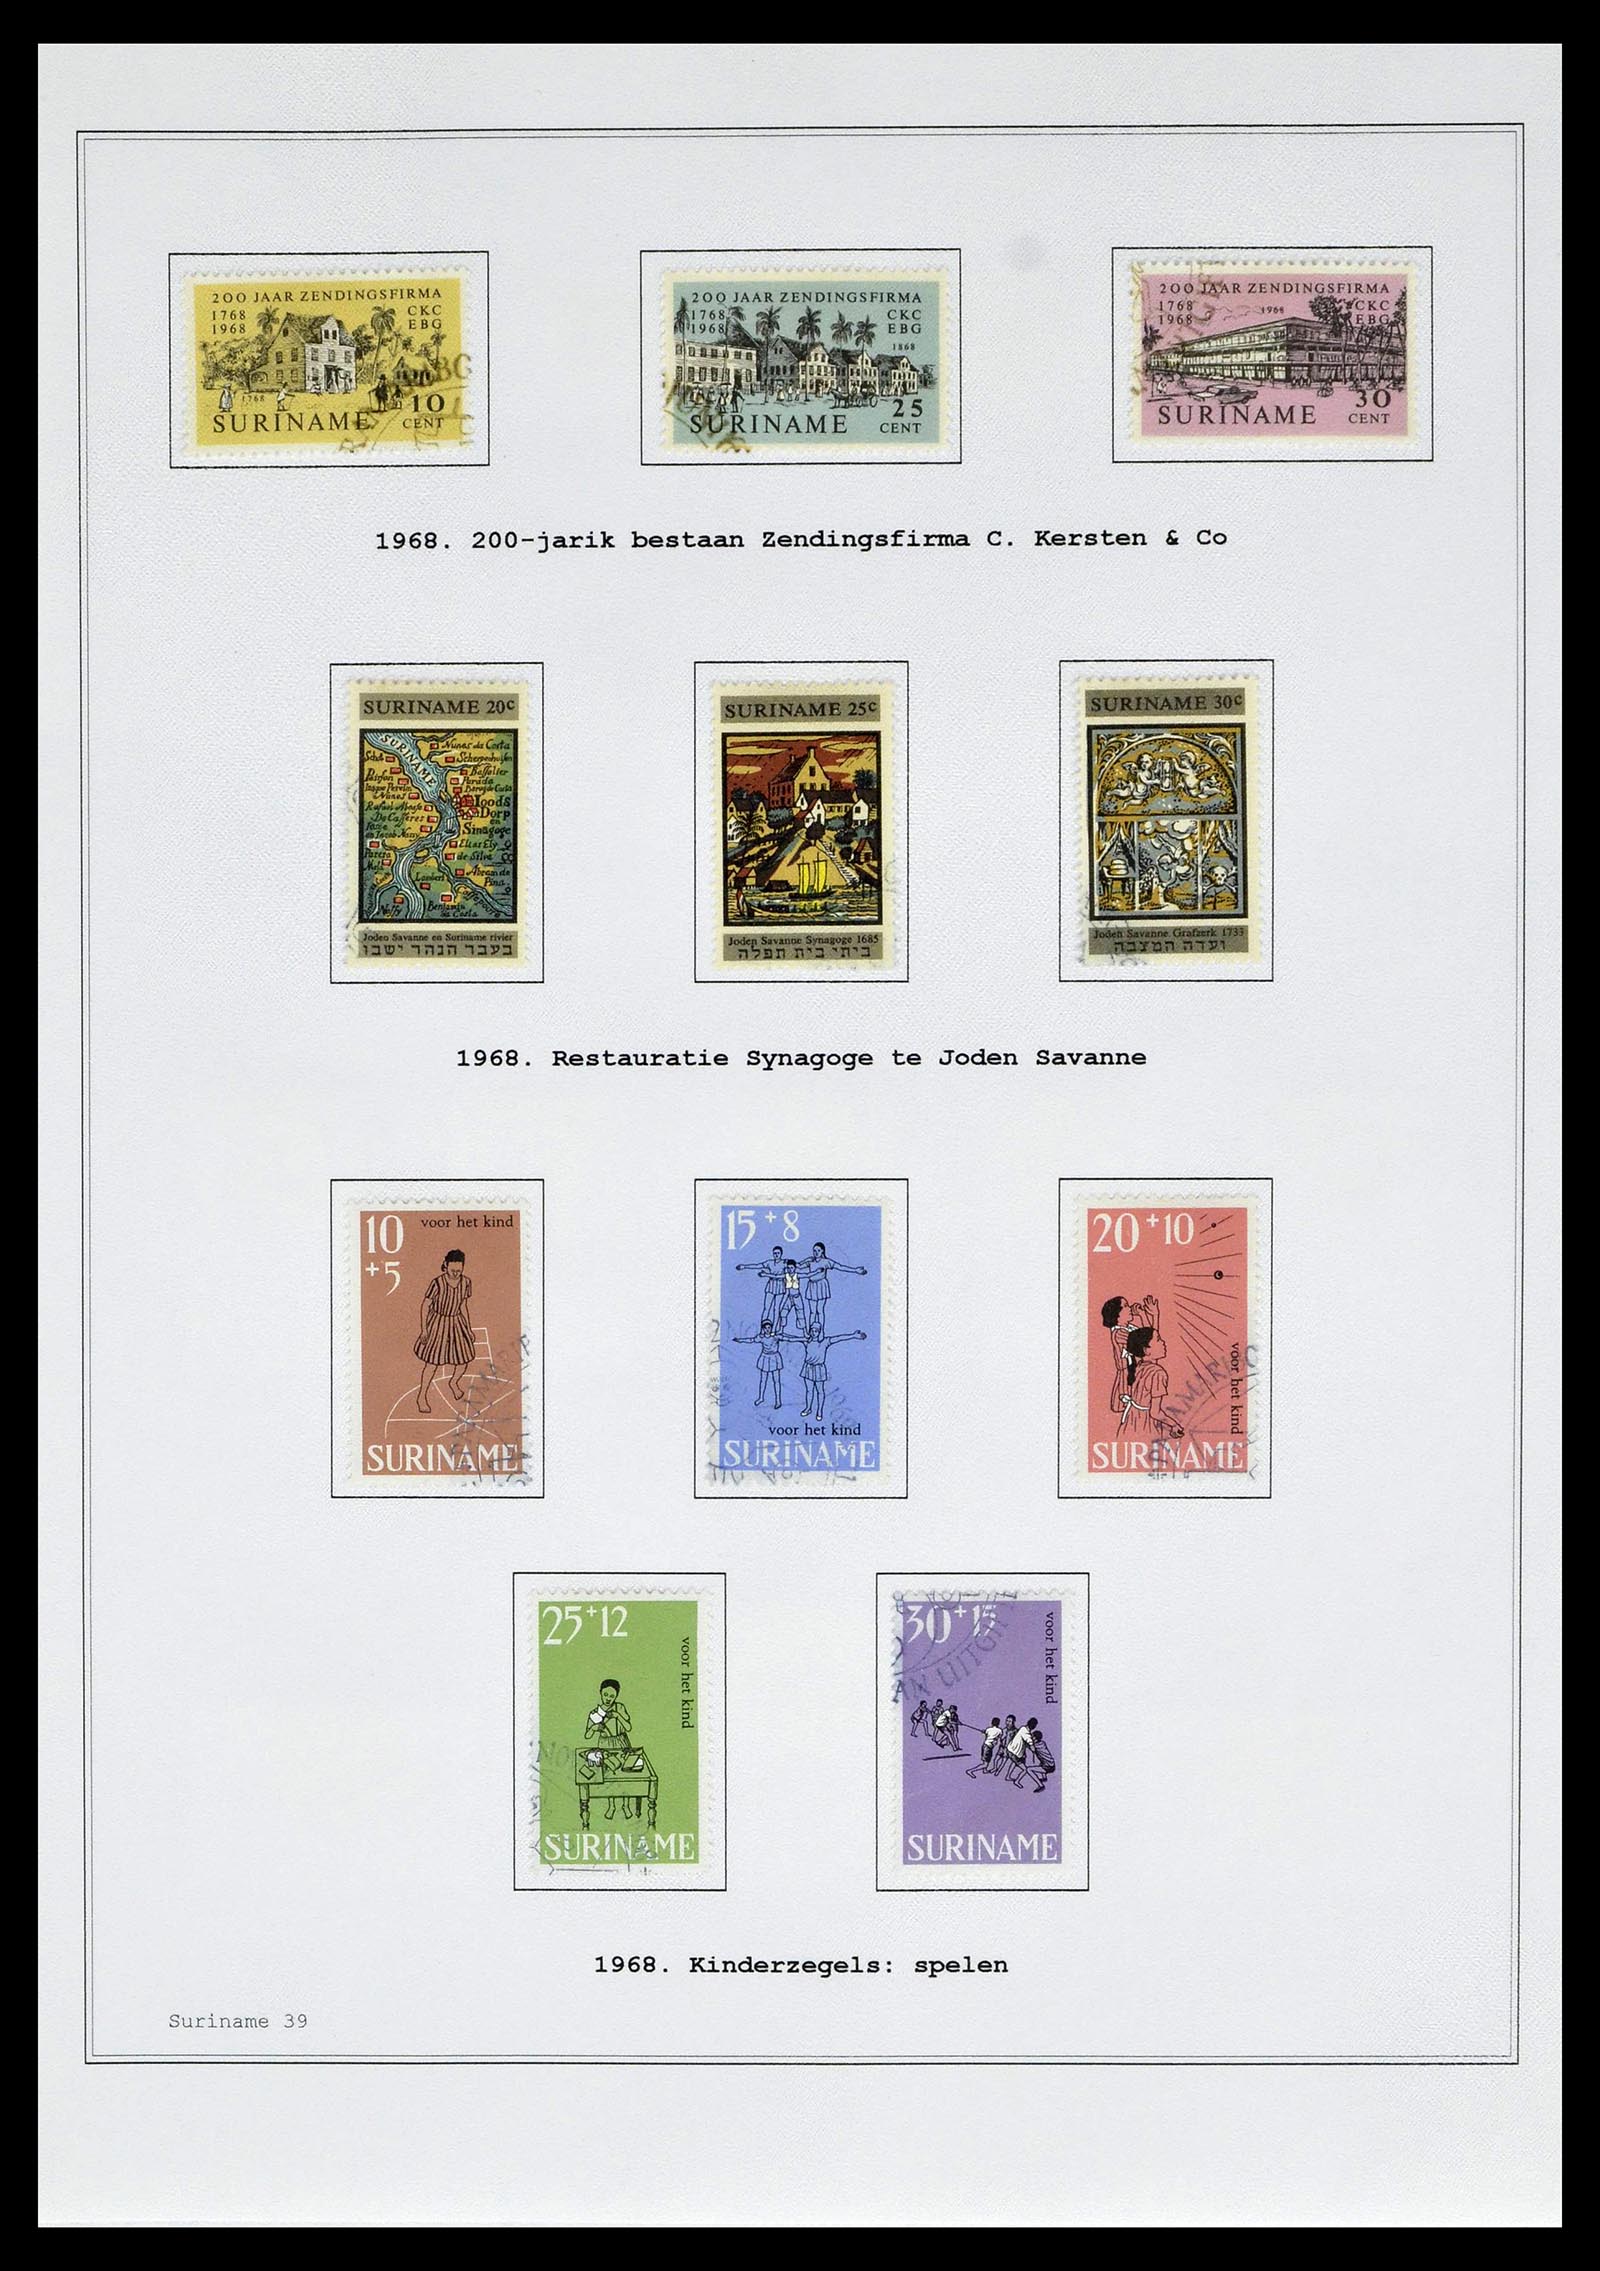 39026 0150 - Stamp collection 39026 Dutch east Indies and Suriname 1864-1975.